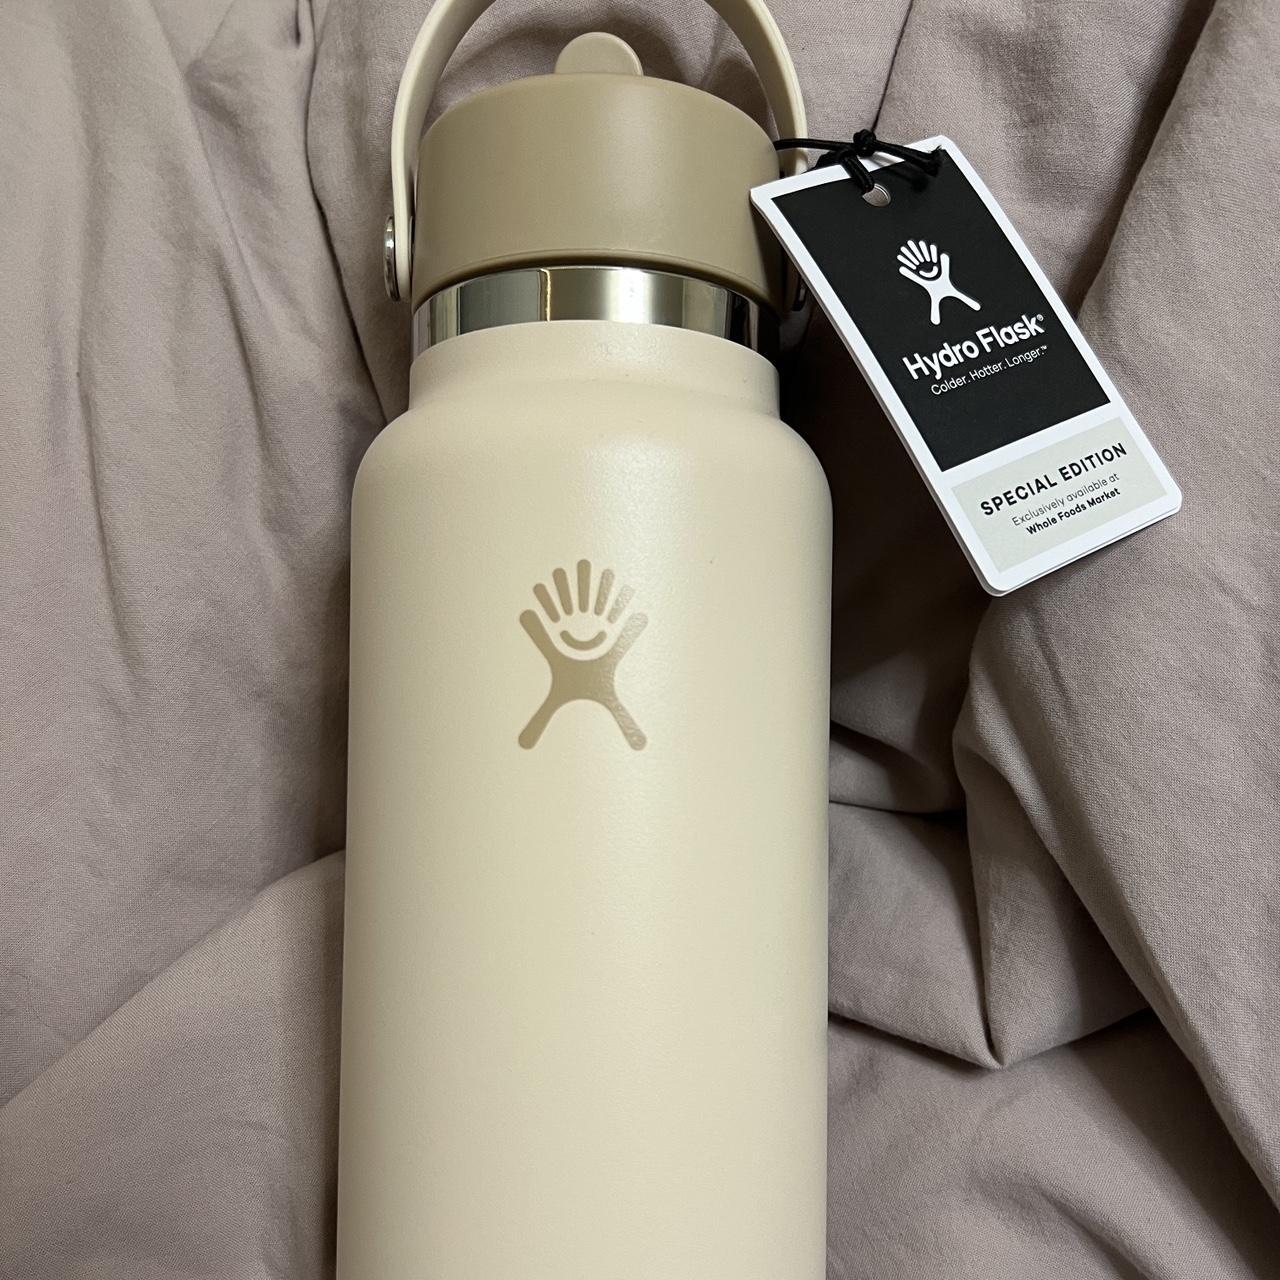 Hydro Flask - Limited Edition 32 OZ NEW Whole Foods Special